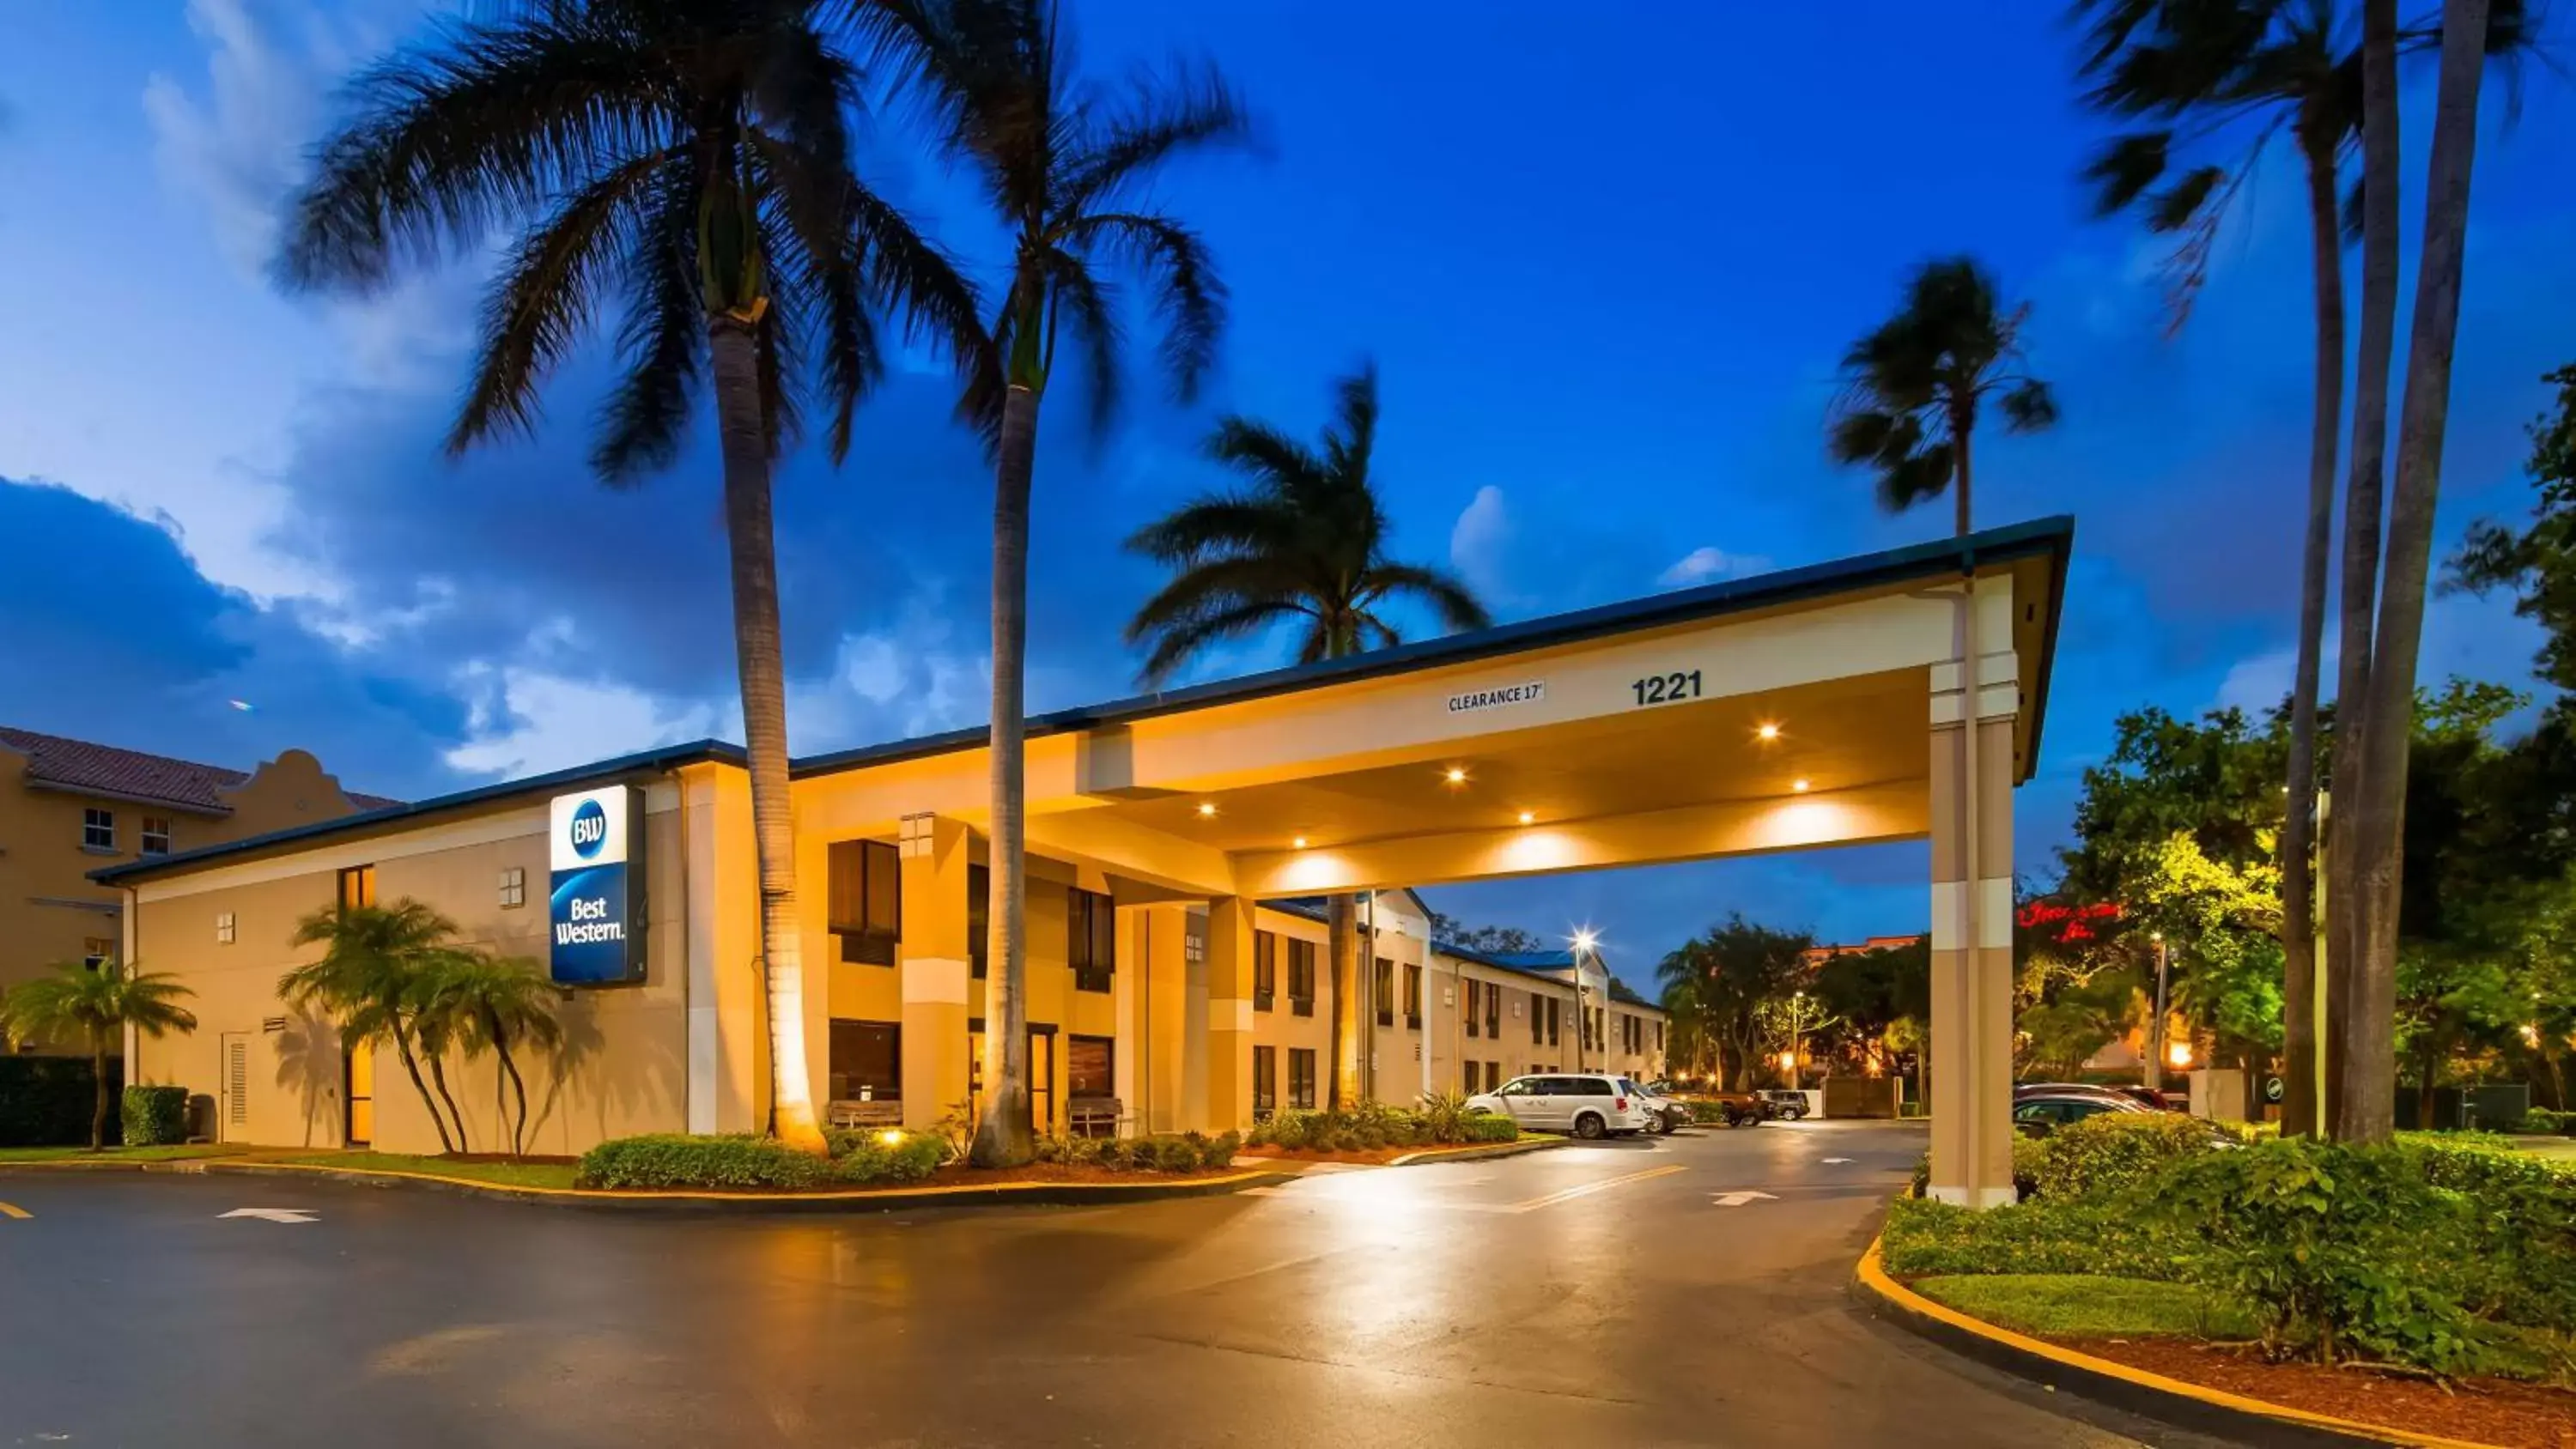 Property Building in Best Western Fort Lauderdale Airport Cruise Port